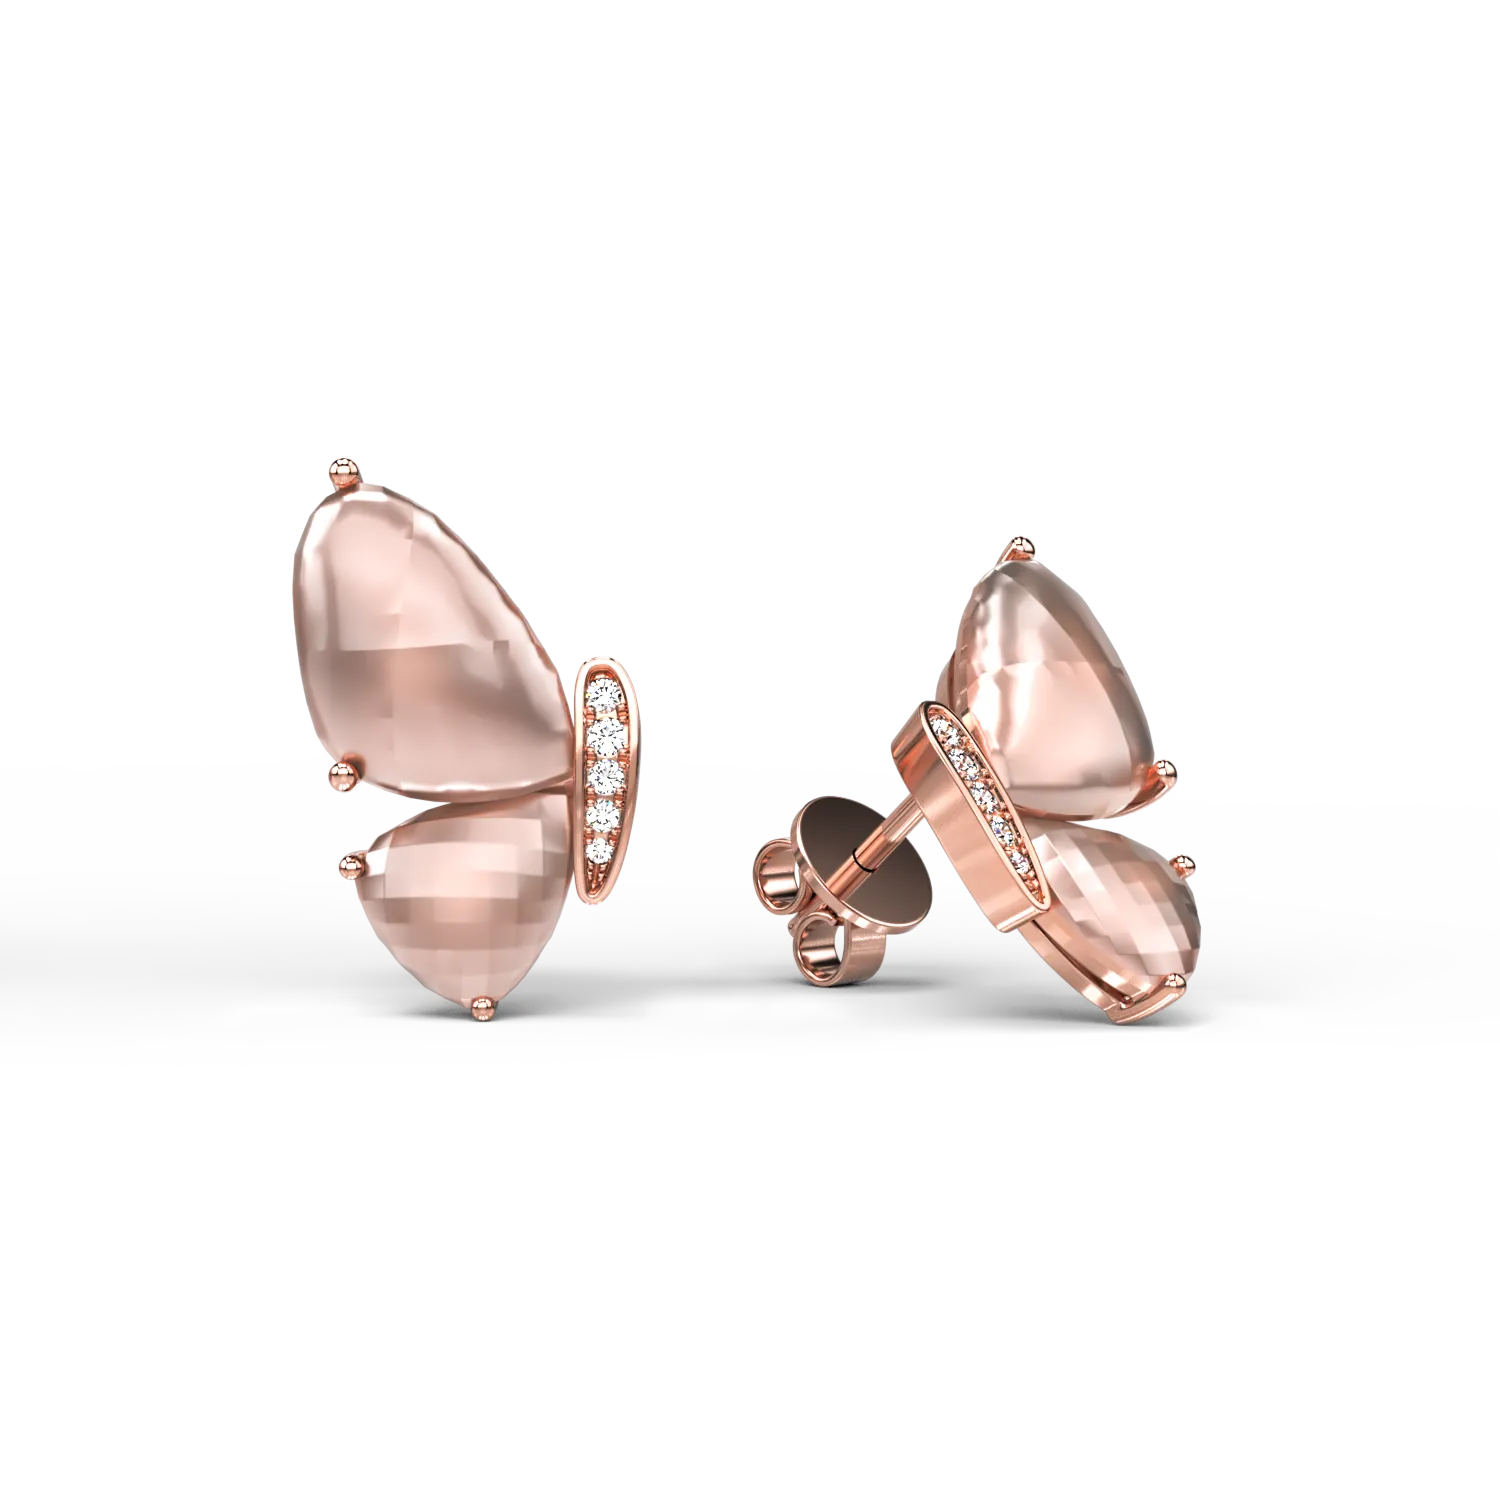 18K rose gold butterflies earrings with 7.7ct rose quartz and 0.06ct diamonds